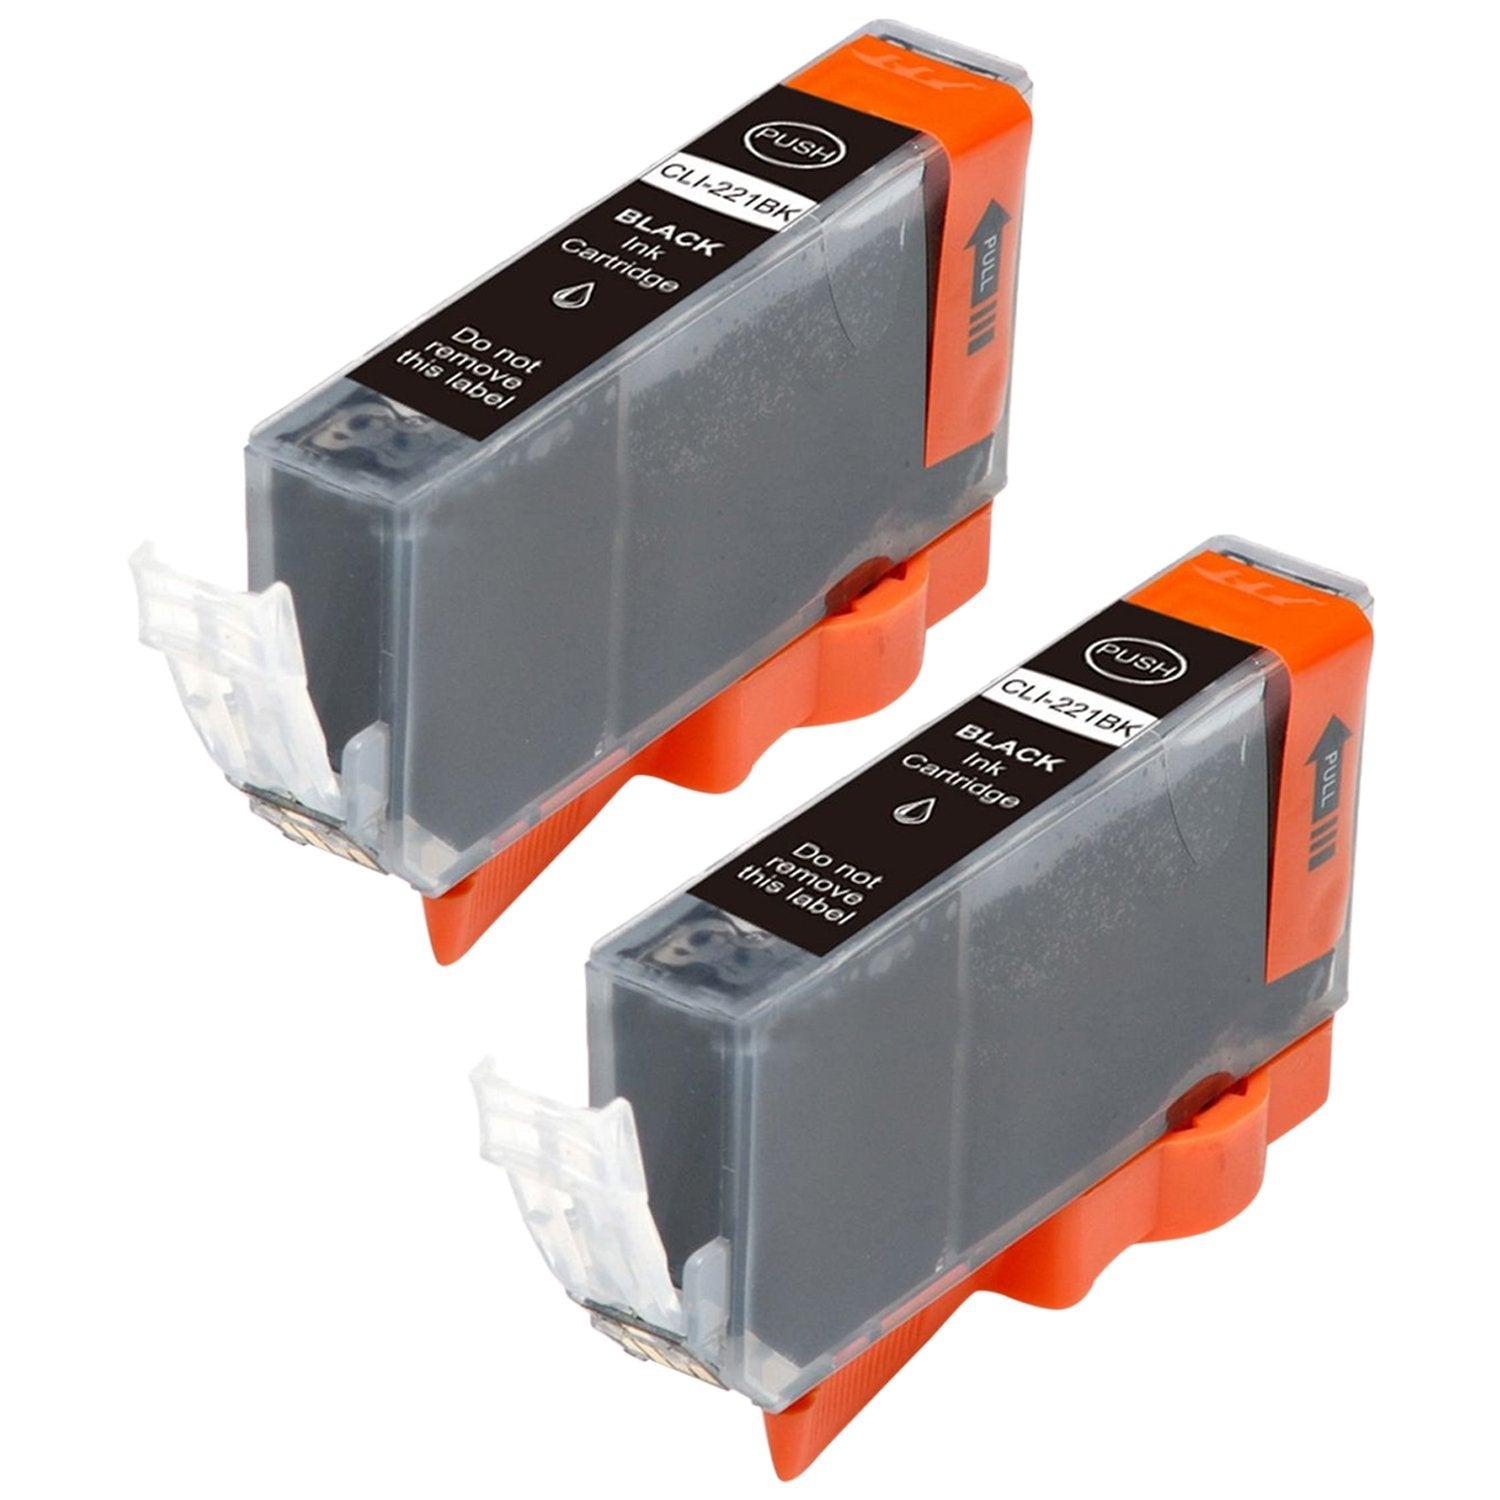 Absolute Toner Canon CLI-221BK (2946B001) Compatible Ink Cartridges Black | Absolute Toner Canon Ink Cartridges